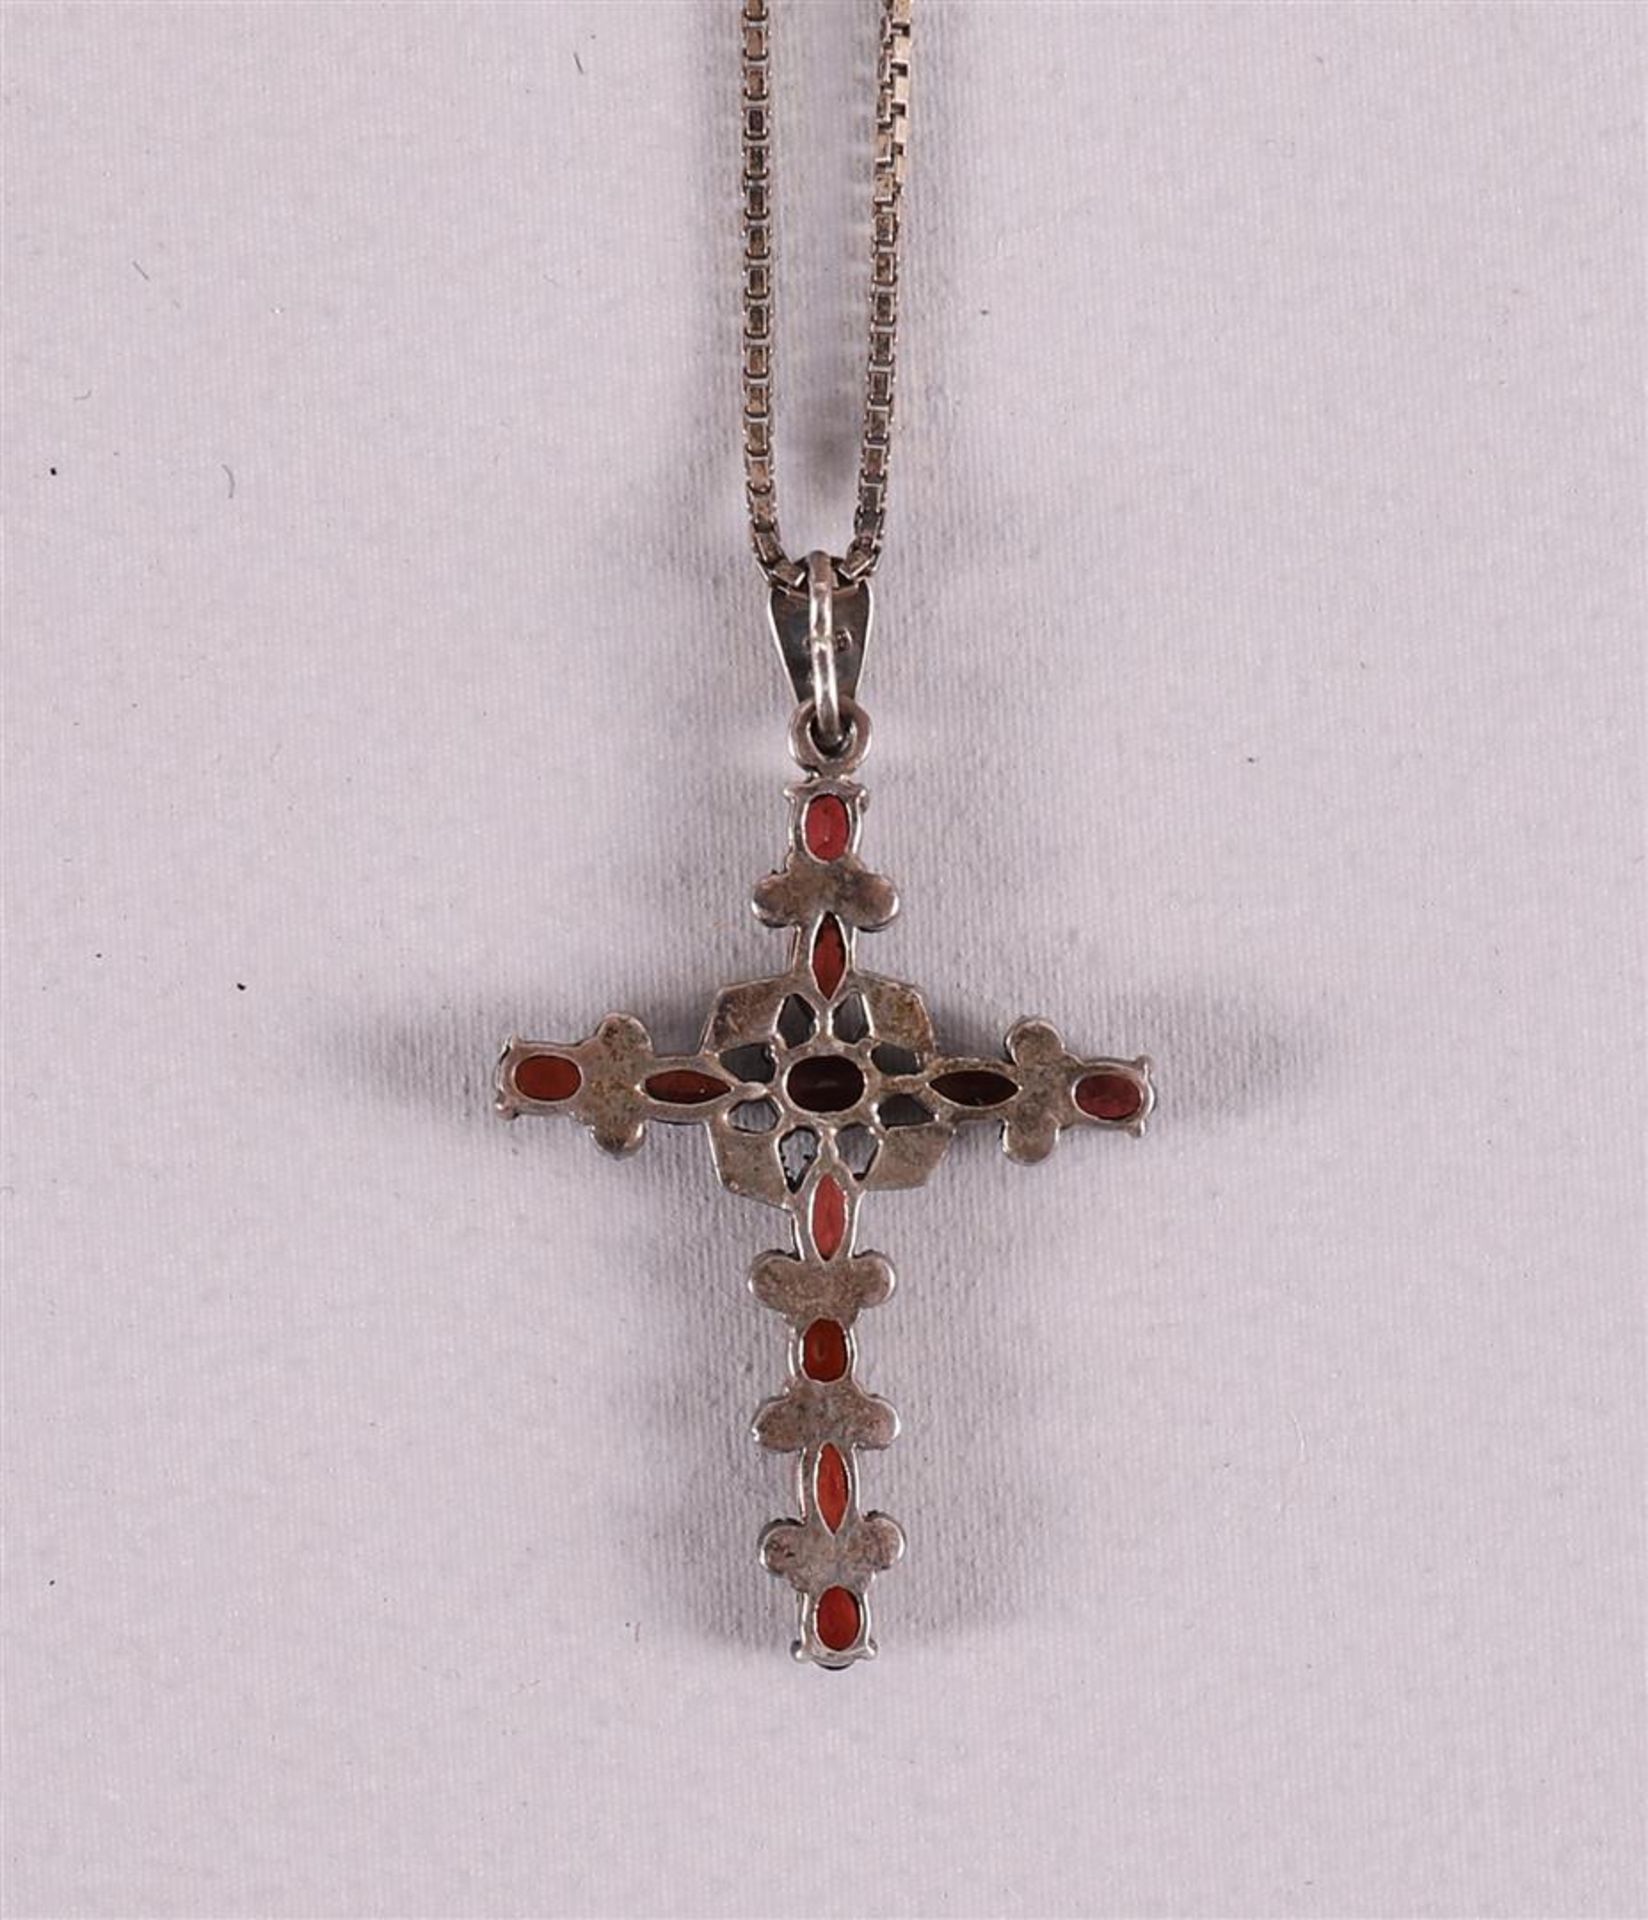 A silver necklace on a ditto silver cross pendant, set with garnets. - Image 3 of 3